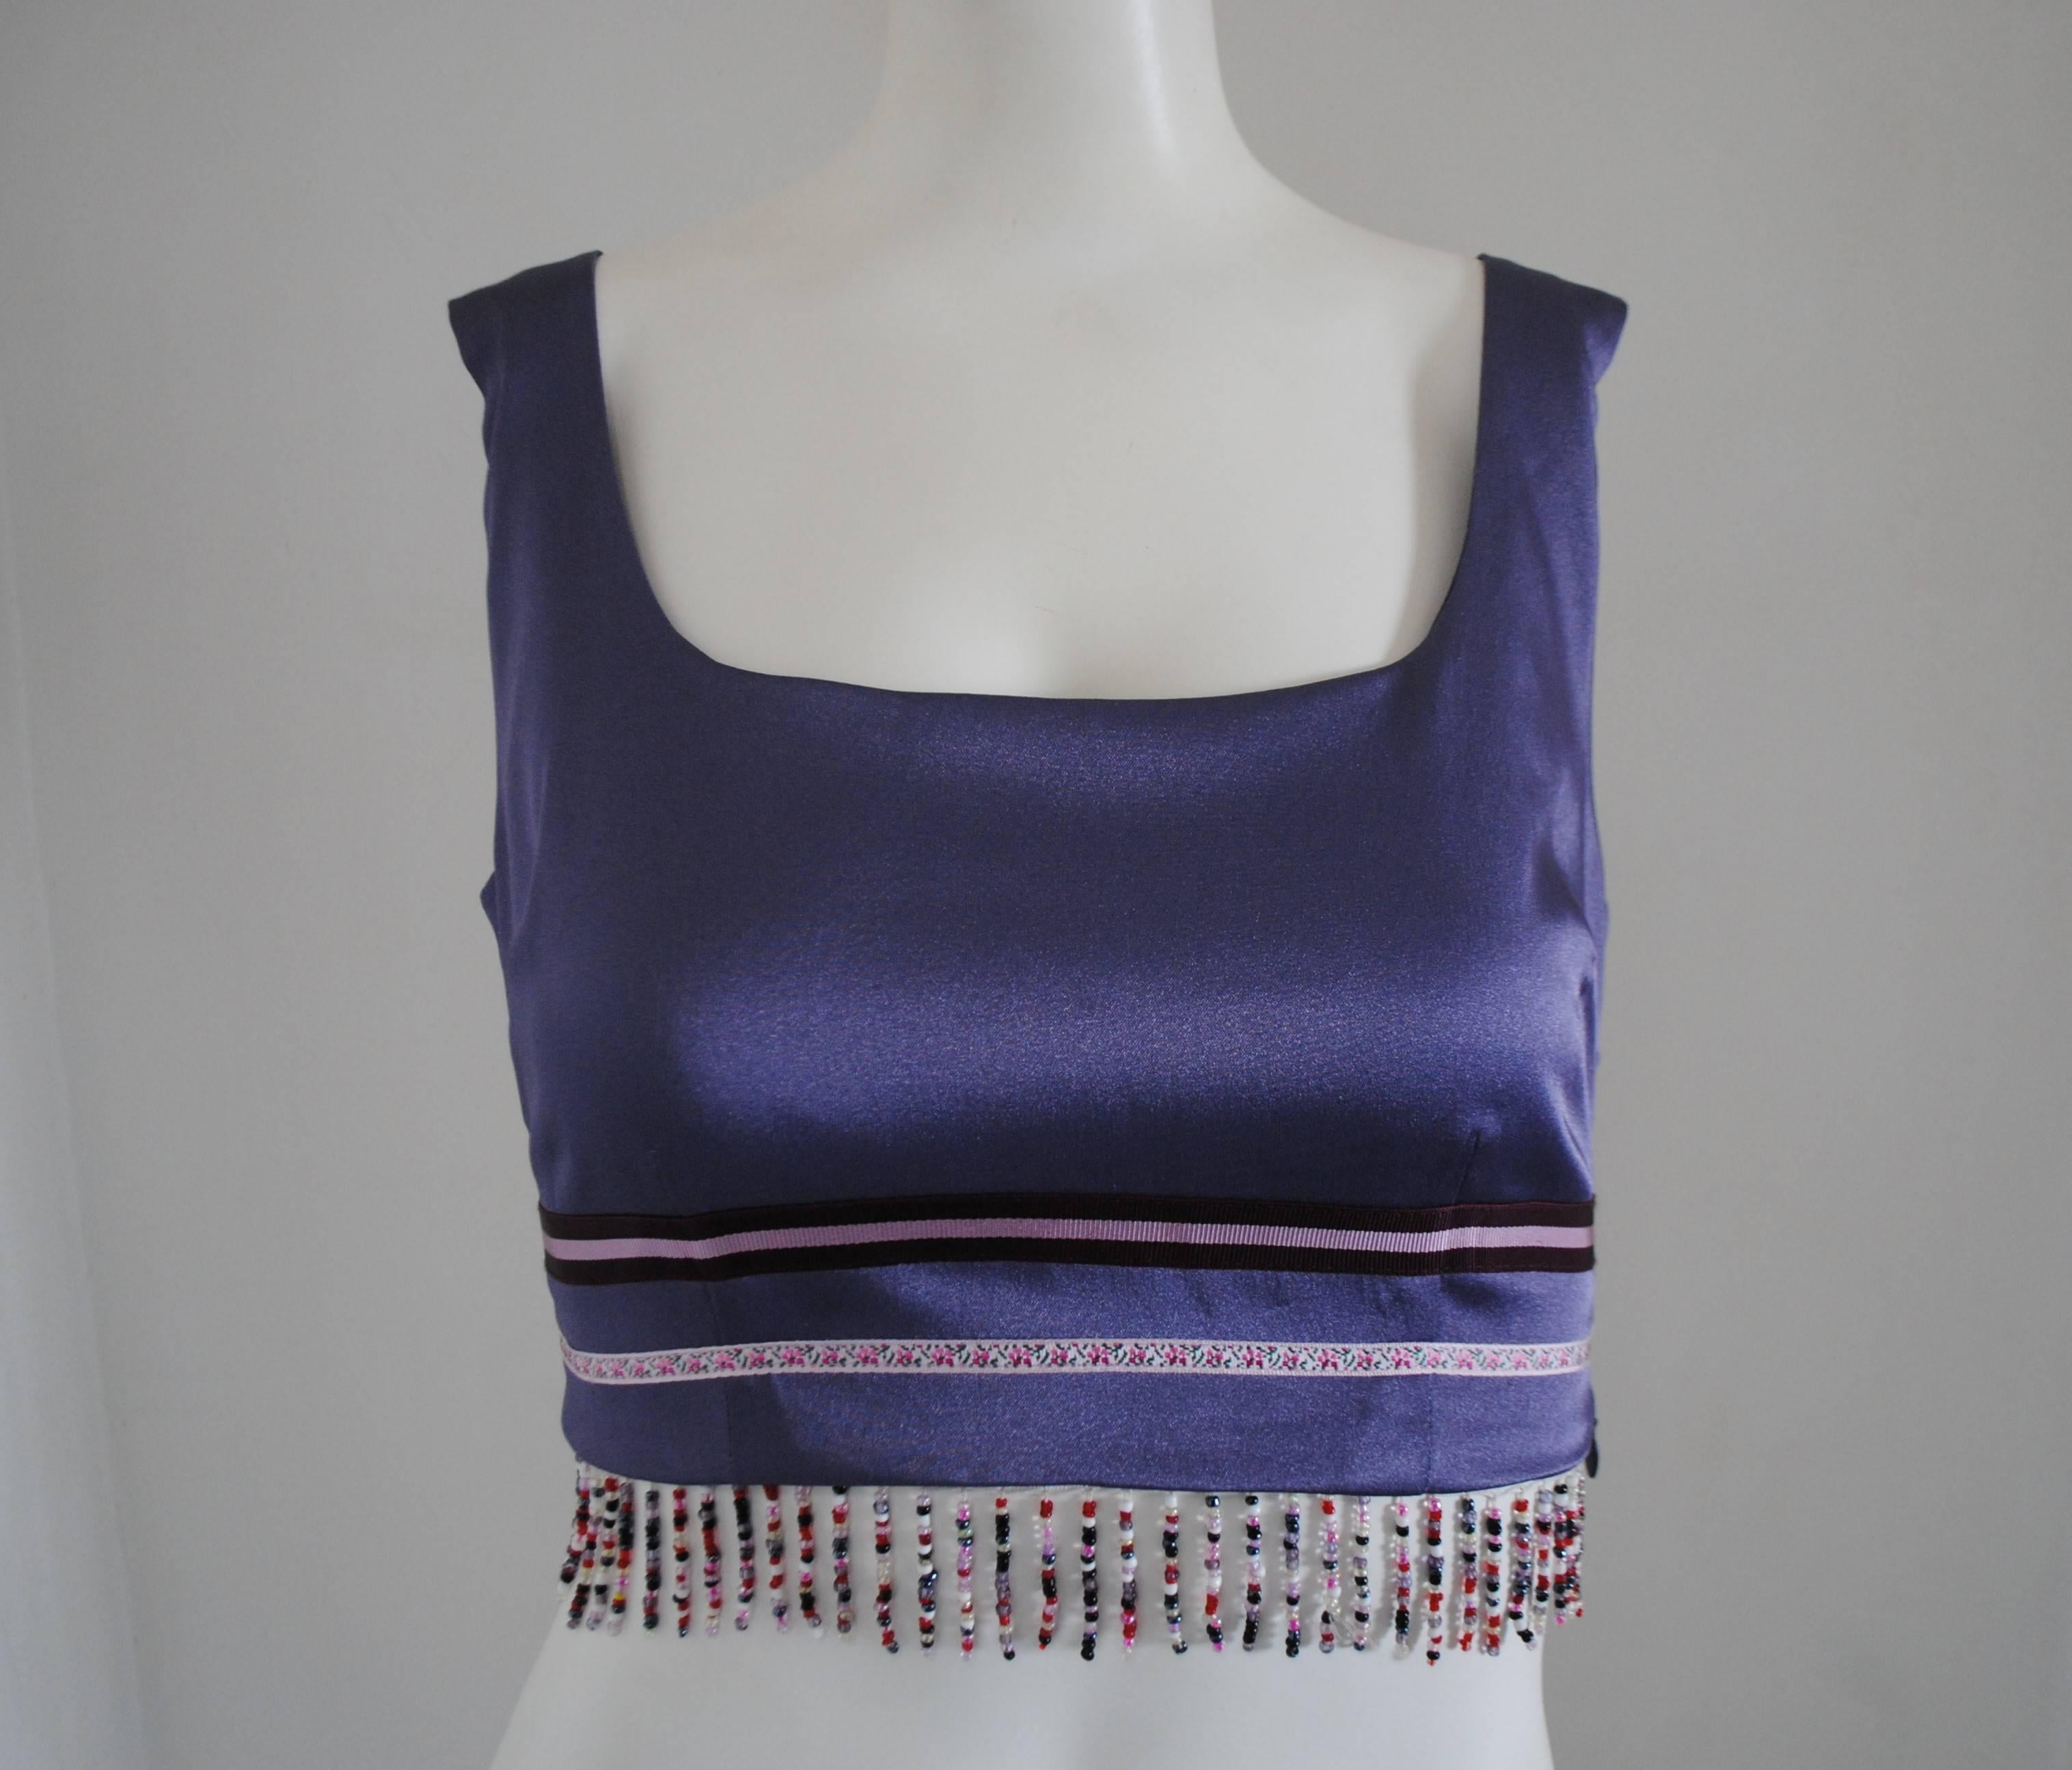 1990s Machattie Violet Beads Top

Totally made in italy in size S

